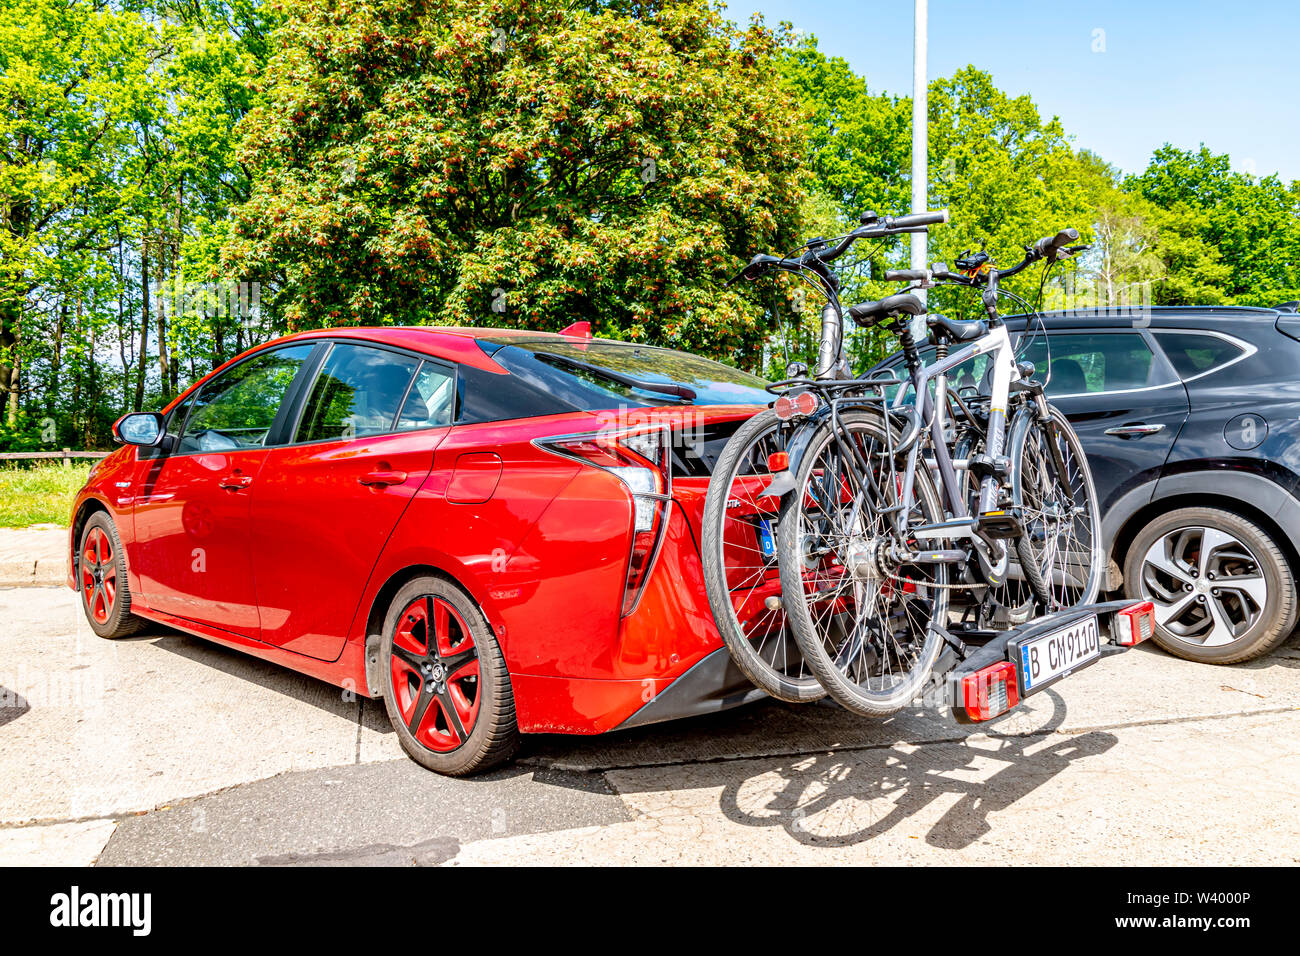 Highway 24 between Berlin and Hamburg, Germany - May 19, 2019: Red Toyota  Prius Hybrid with a cycle carrier and two pedelecs on a highway picnic area  Stock Photo - Alamy